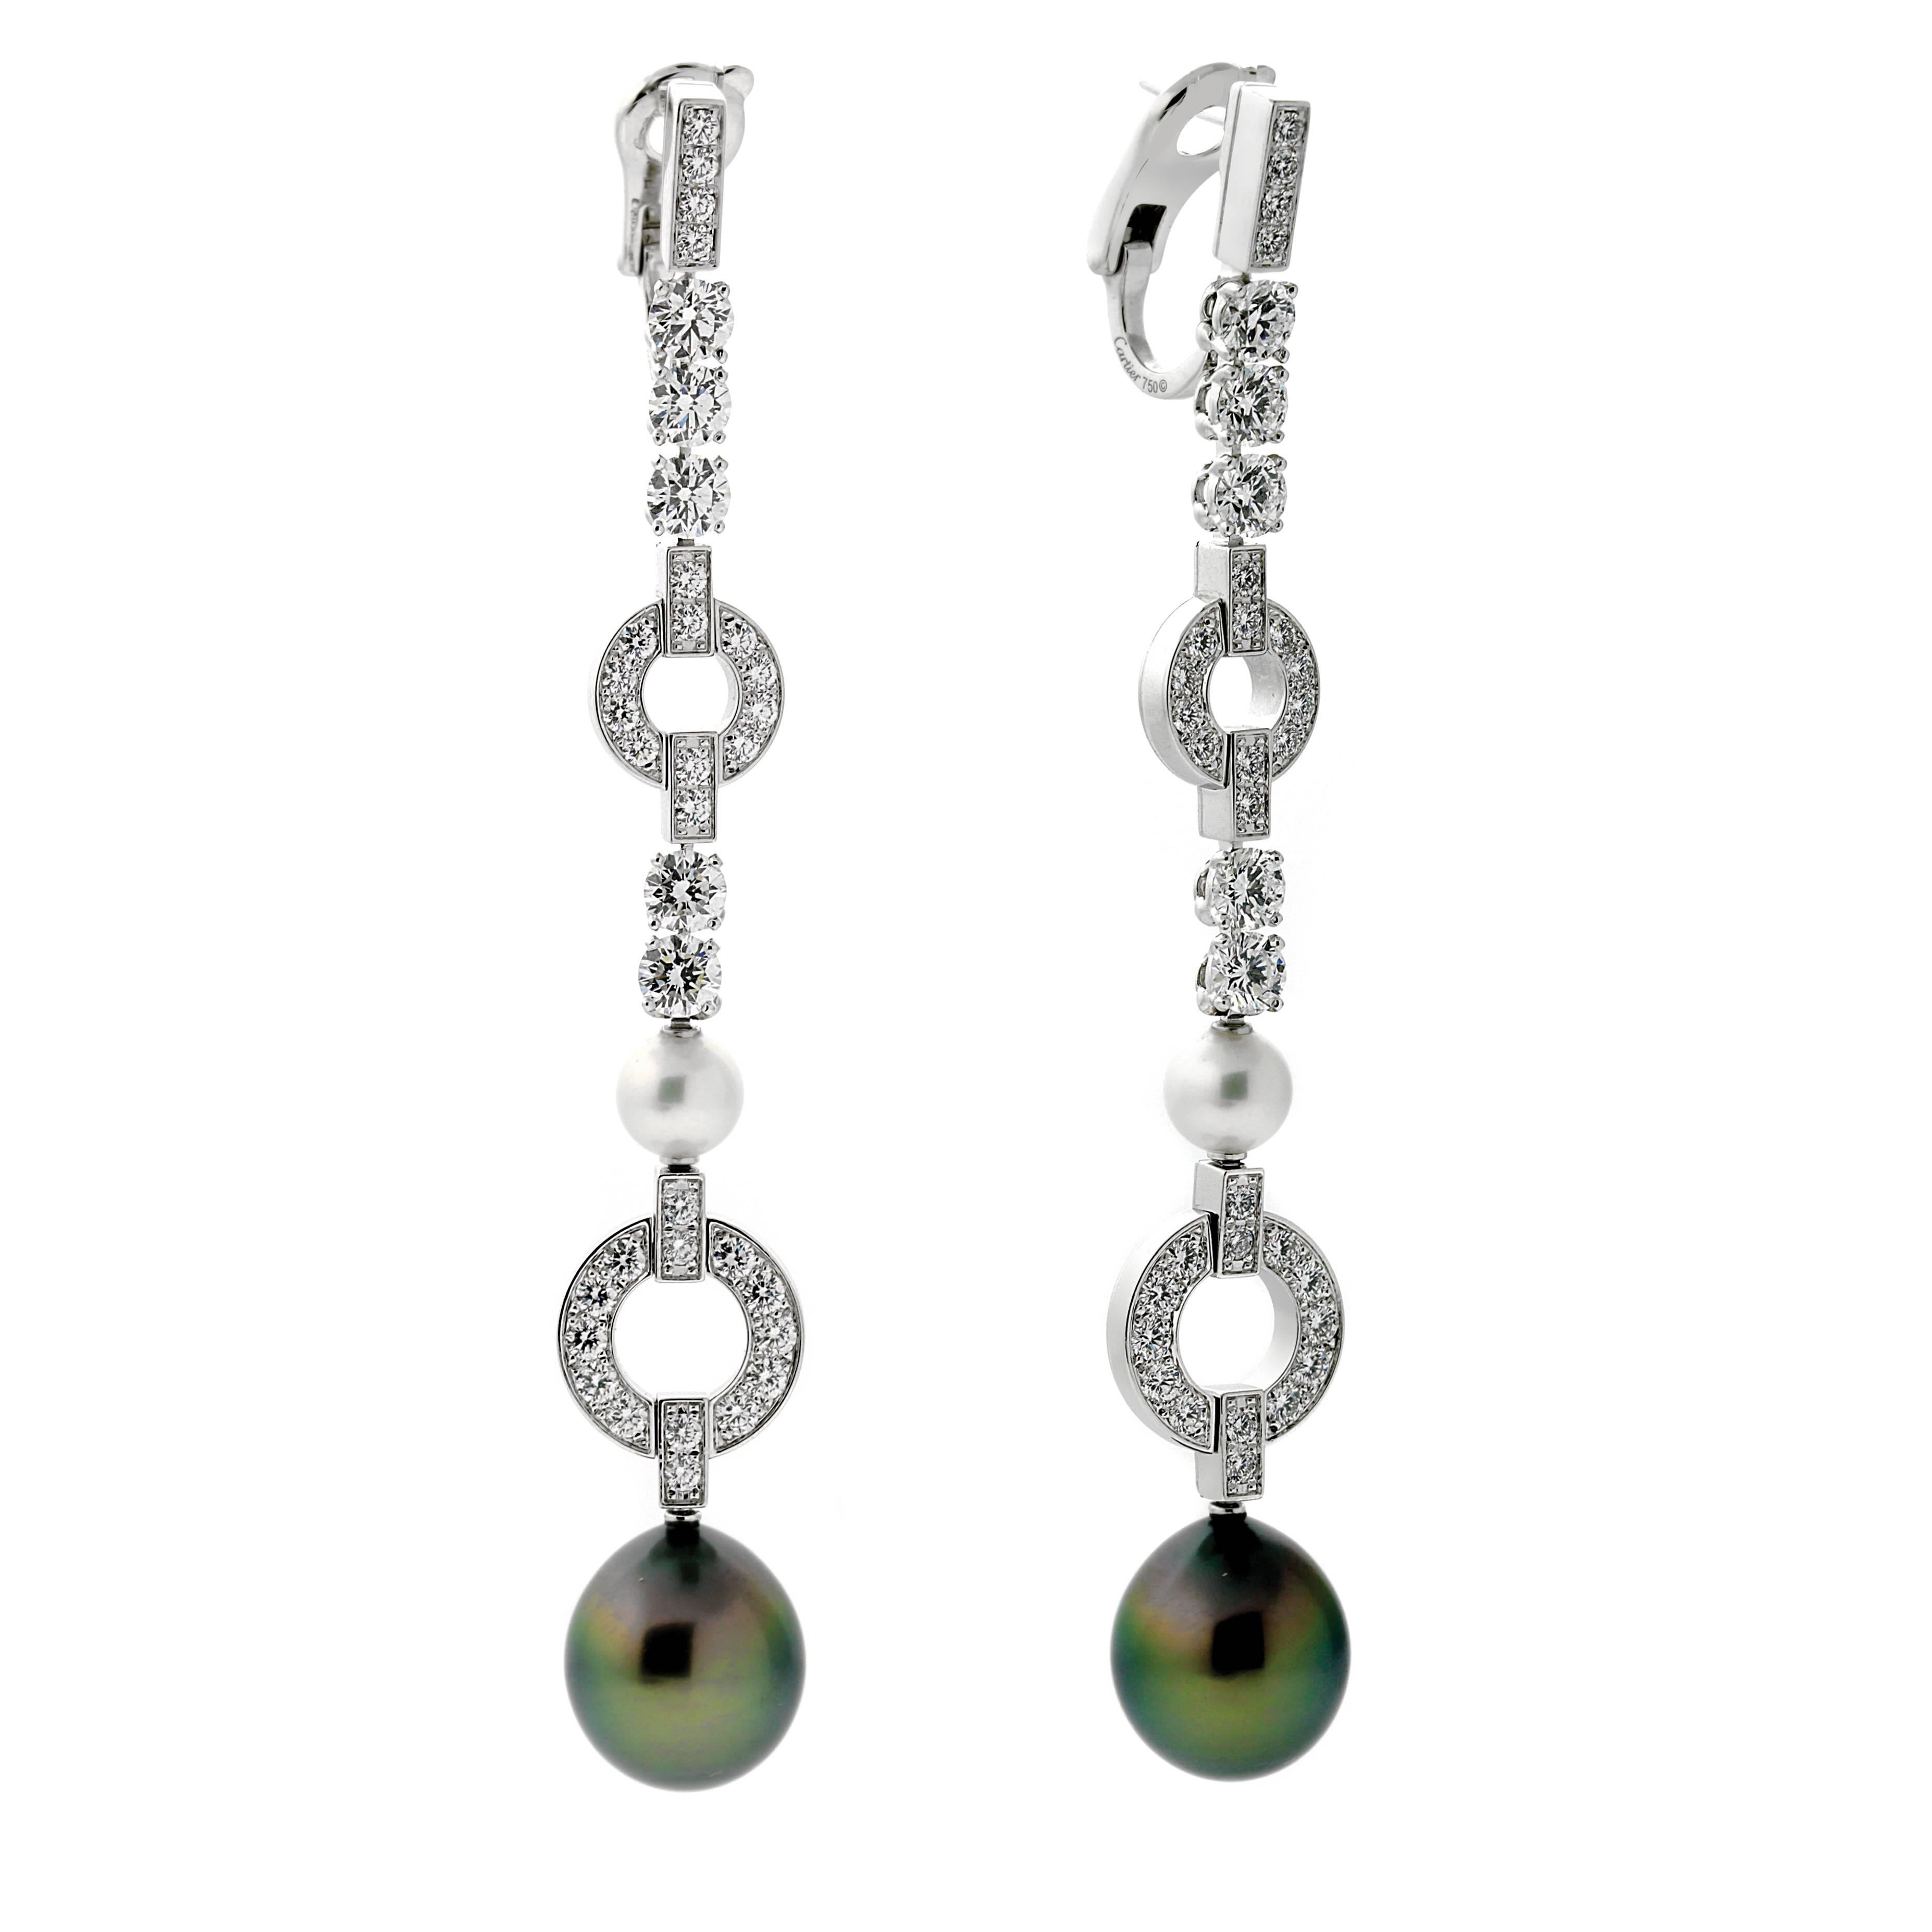 A stunning pair of Cartier diamond drop earrings featuring white and black pearls crafted in 18k White Gold. The earrings have a length of 3.25 Inches, and a weight of 24.5 grams

Cartier Est Retail: $58,000 + Tax
Inventory ID: 0000078